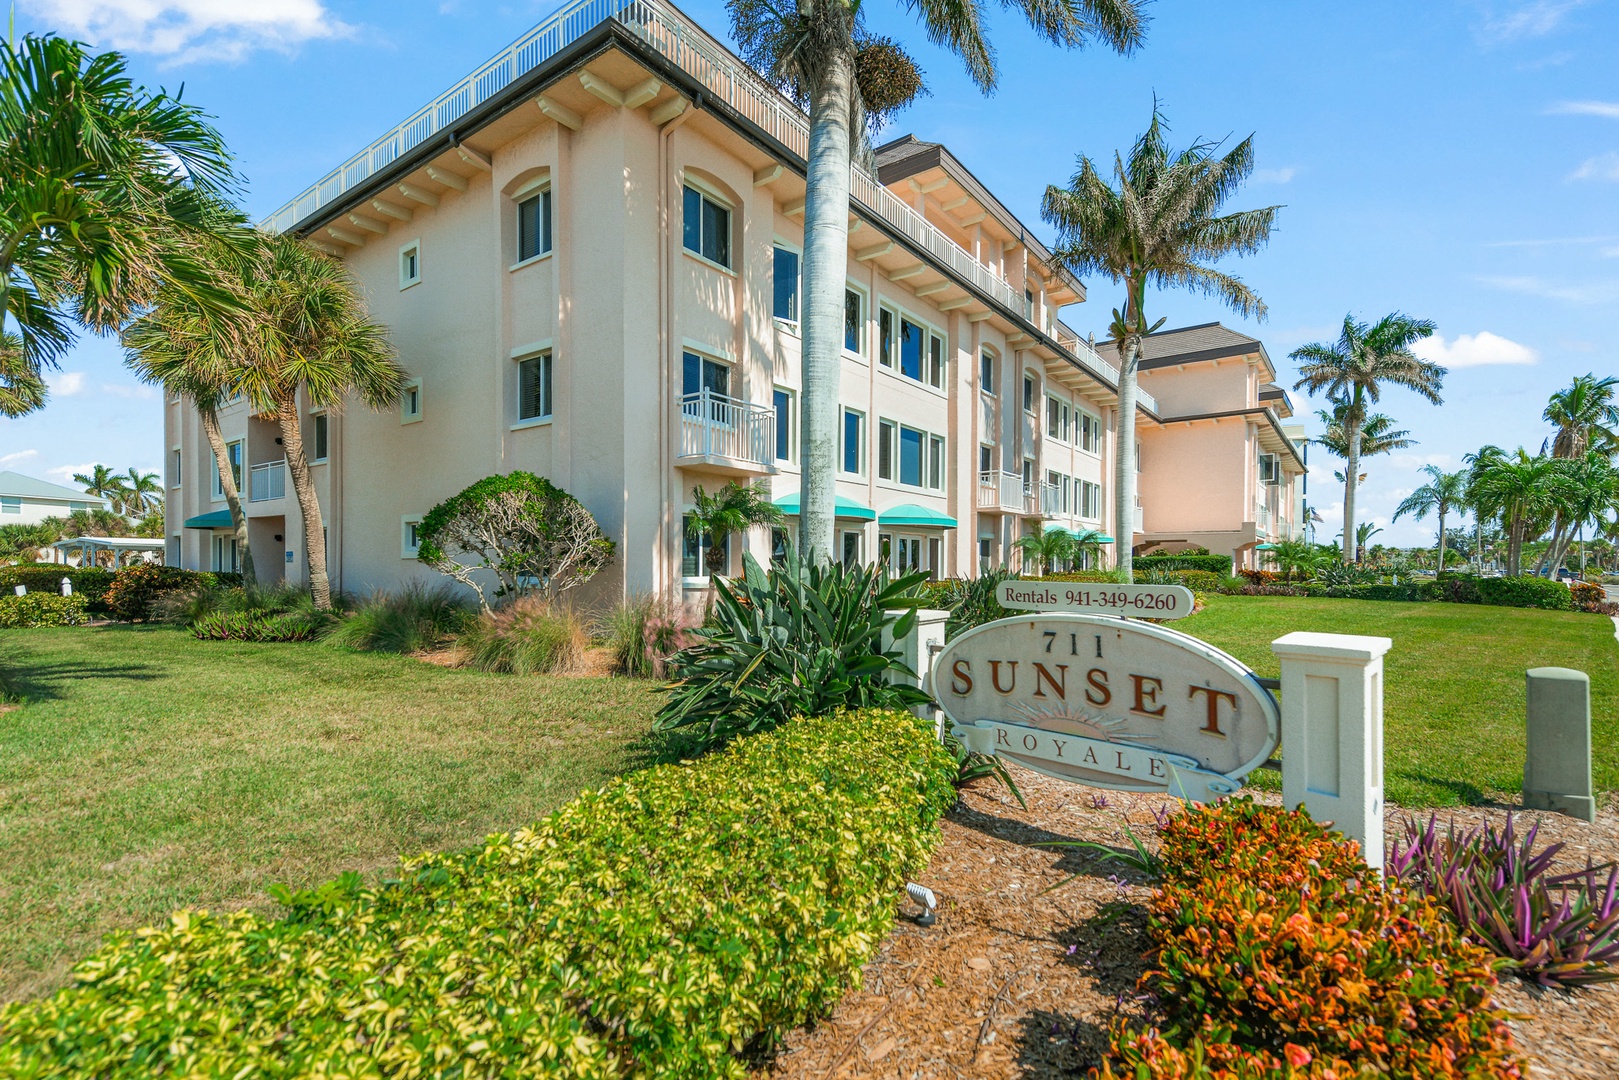 Sunset Royale - Tropical Sands Accommodations